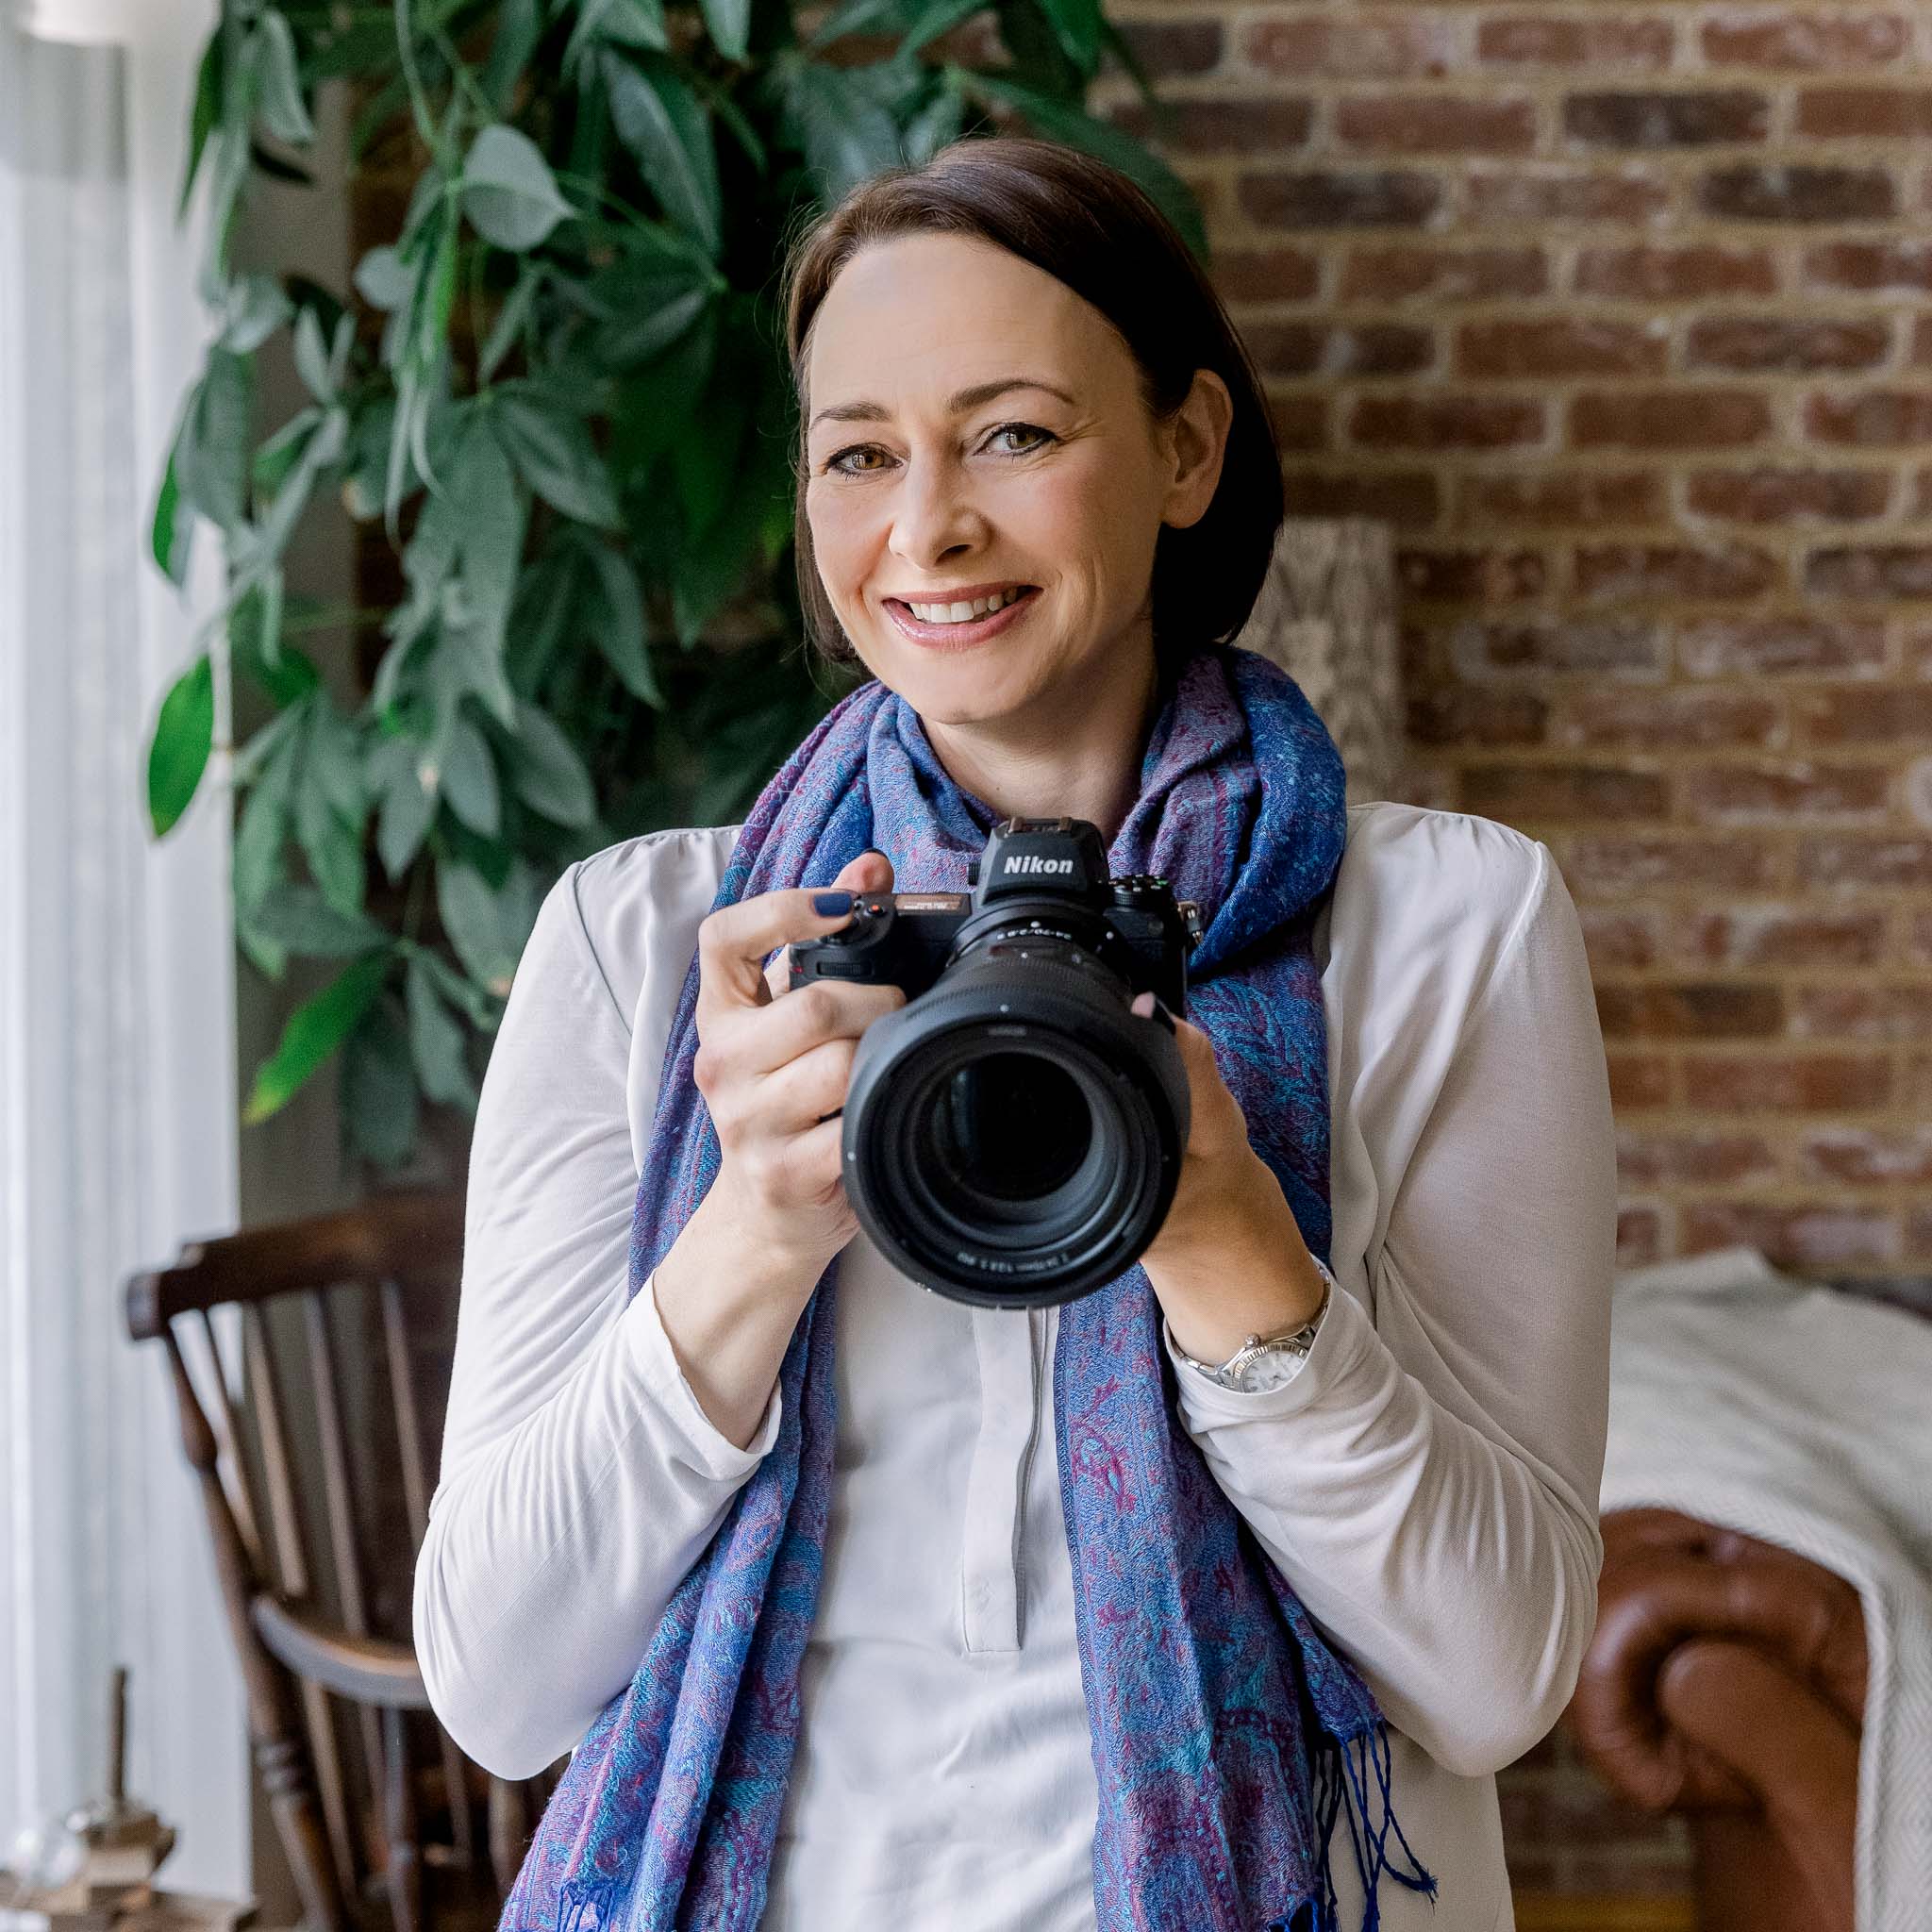 Picture of a brown haired woman holding a camera and smiling